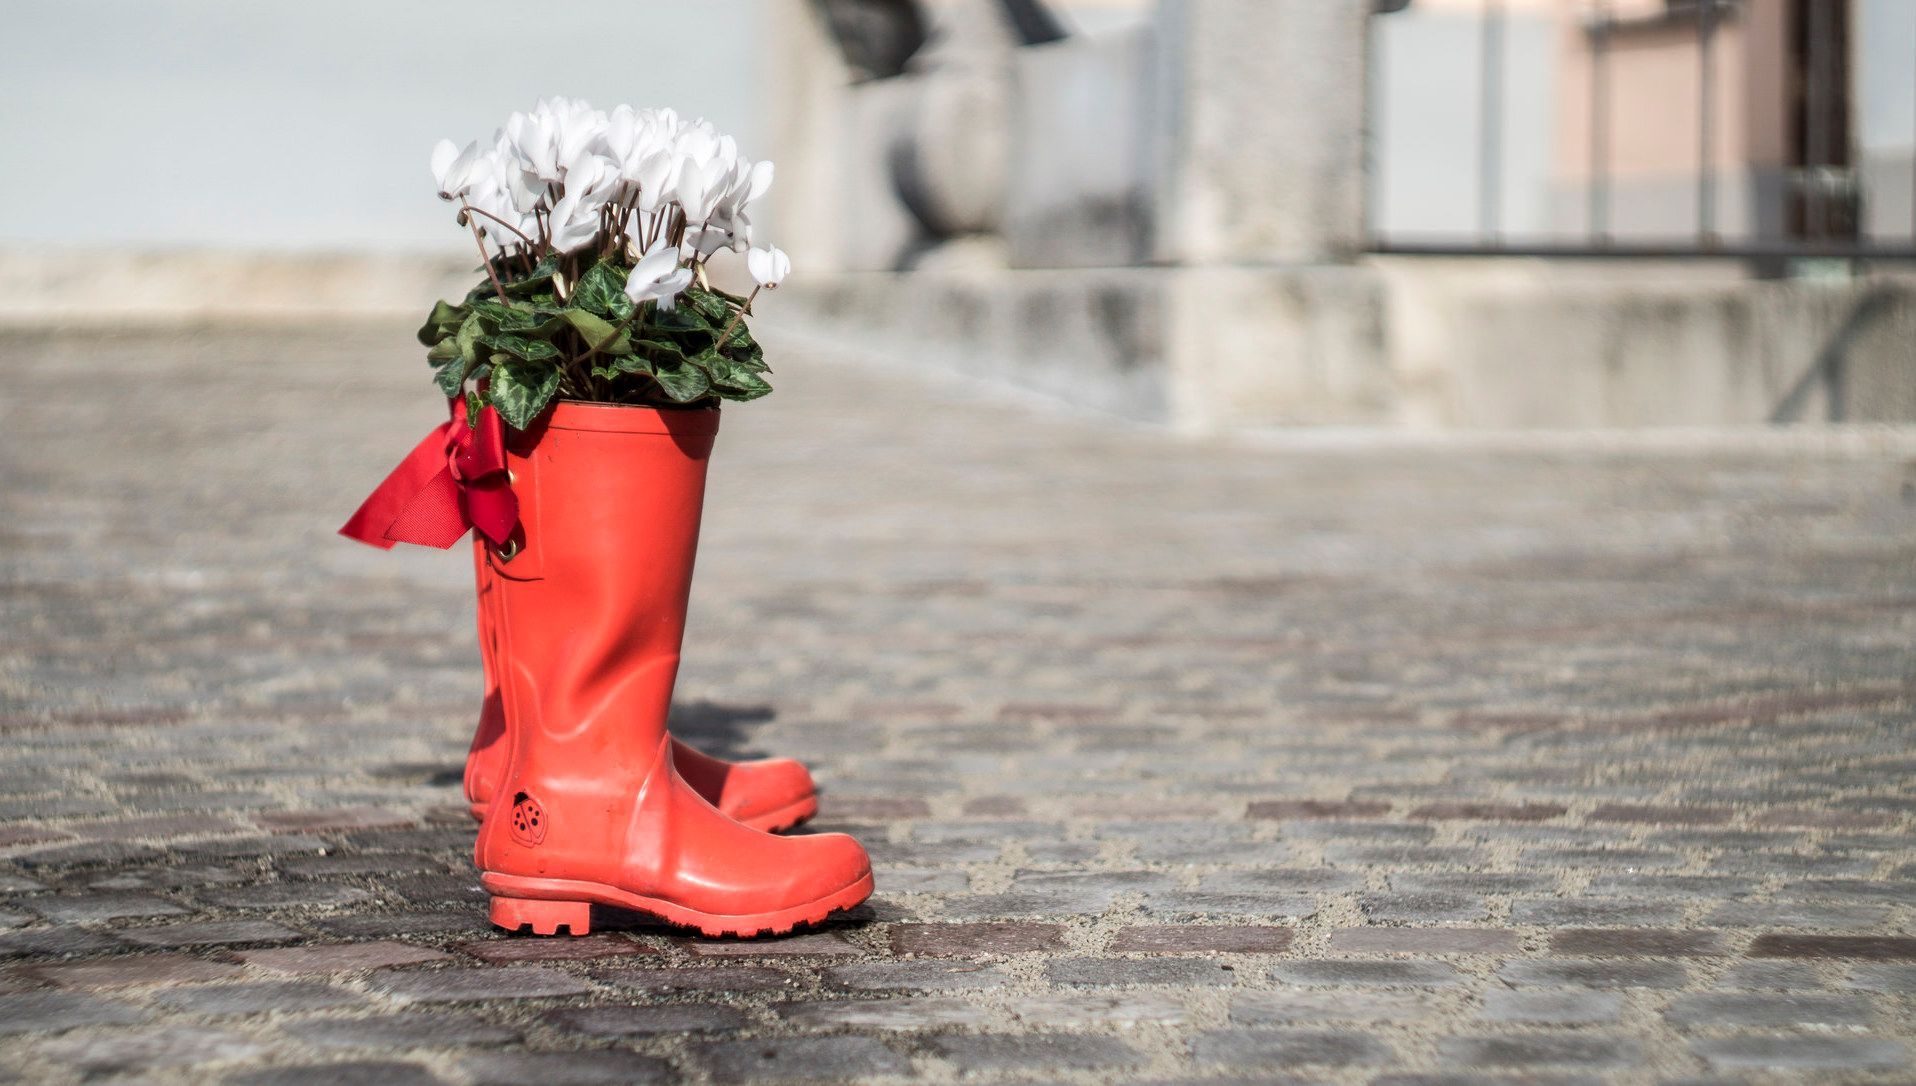 A pair of bright-red rubber rain boots stand in a cobblestone courtyard. The boots hold bunches of white flowers. Why not?